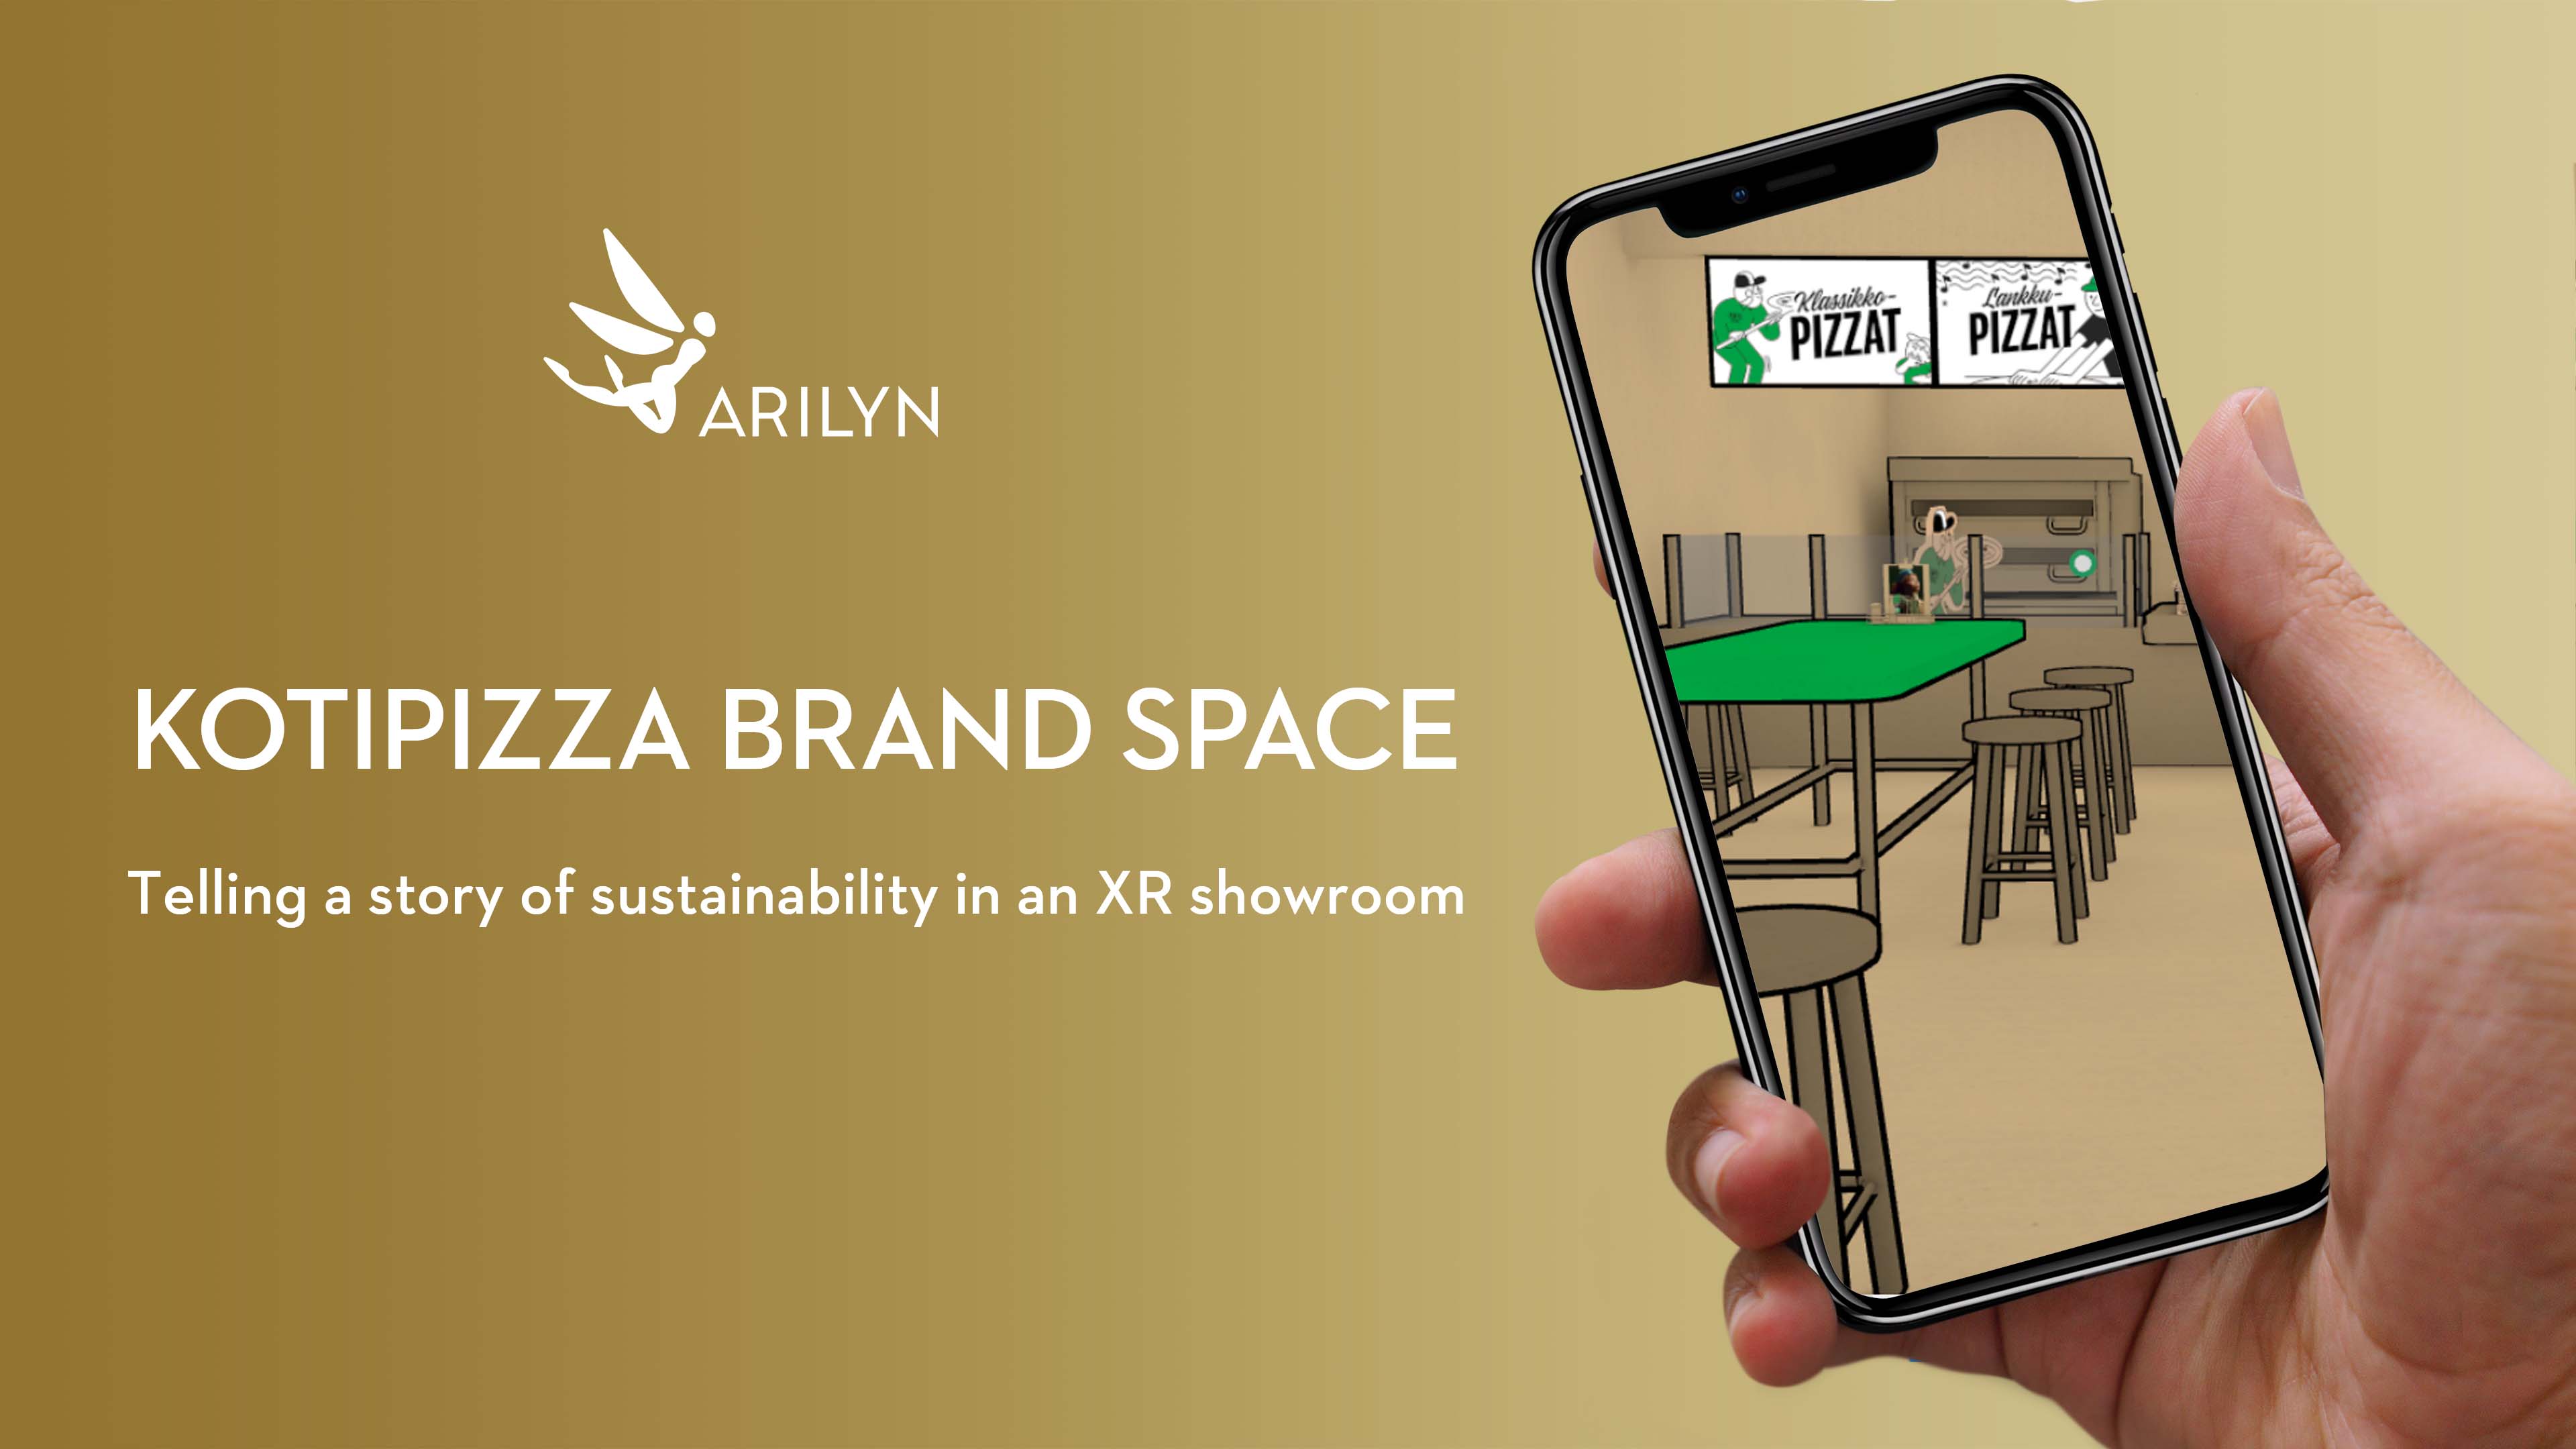 Kotipizza tells the story of sustainability through extended reality